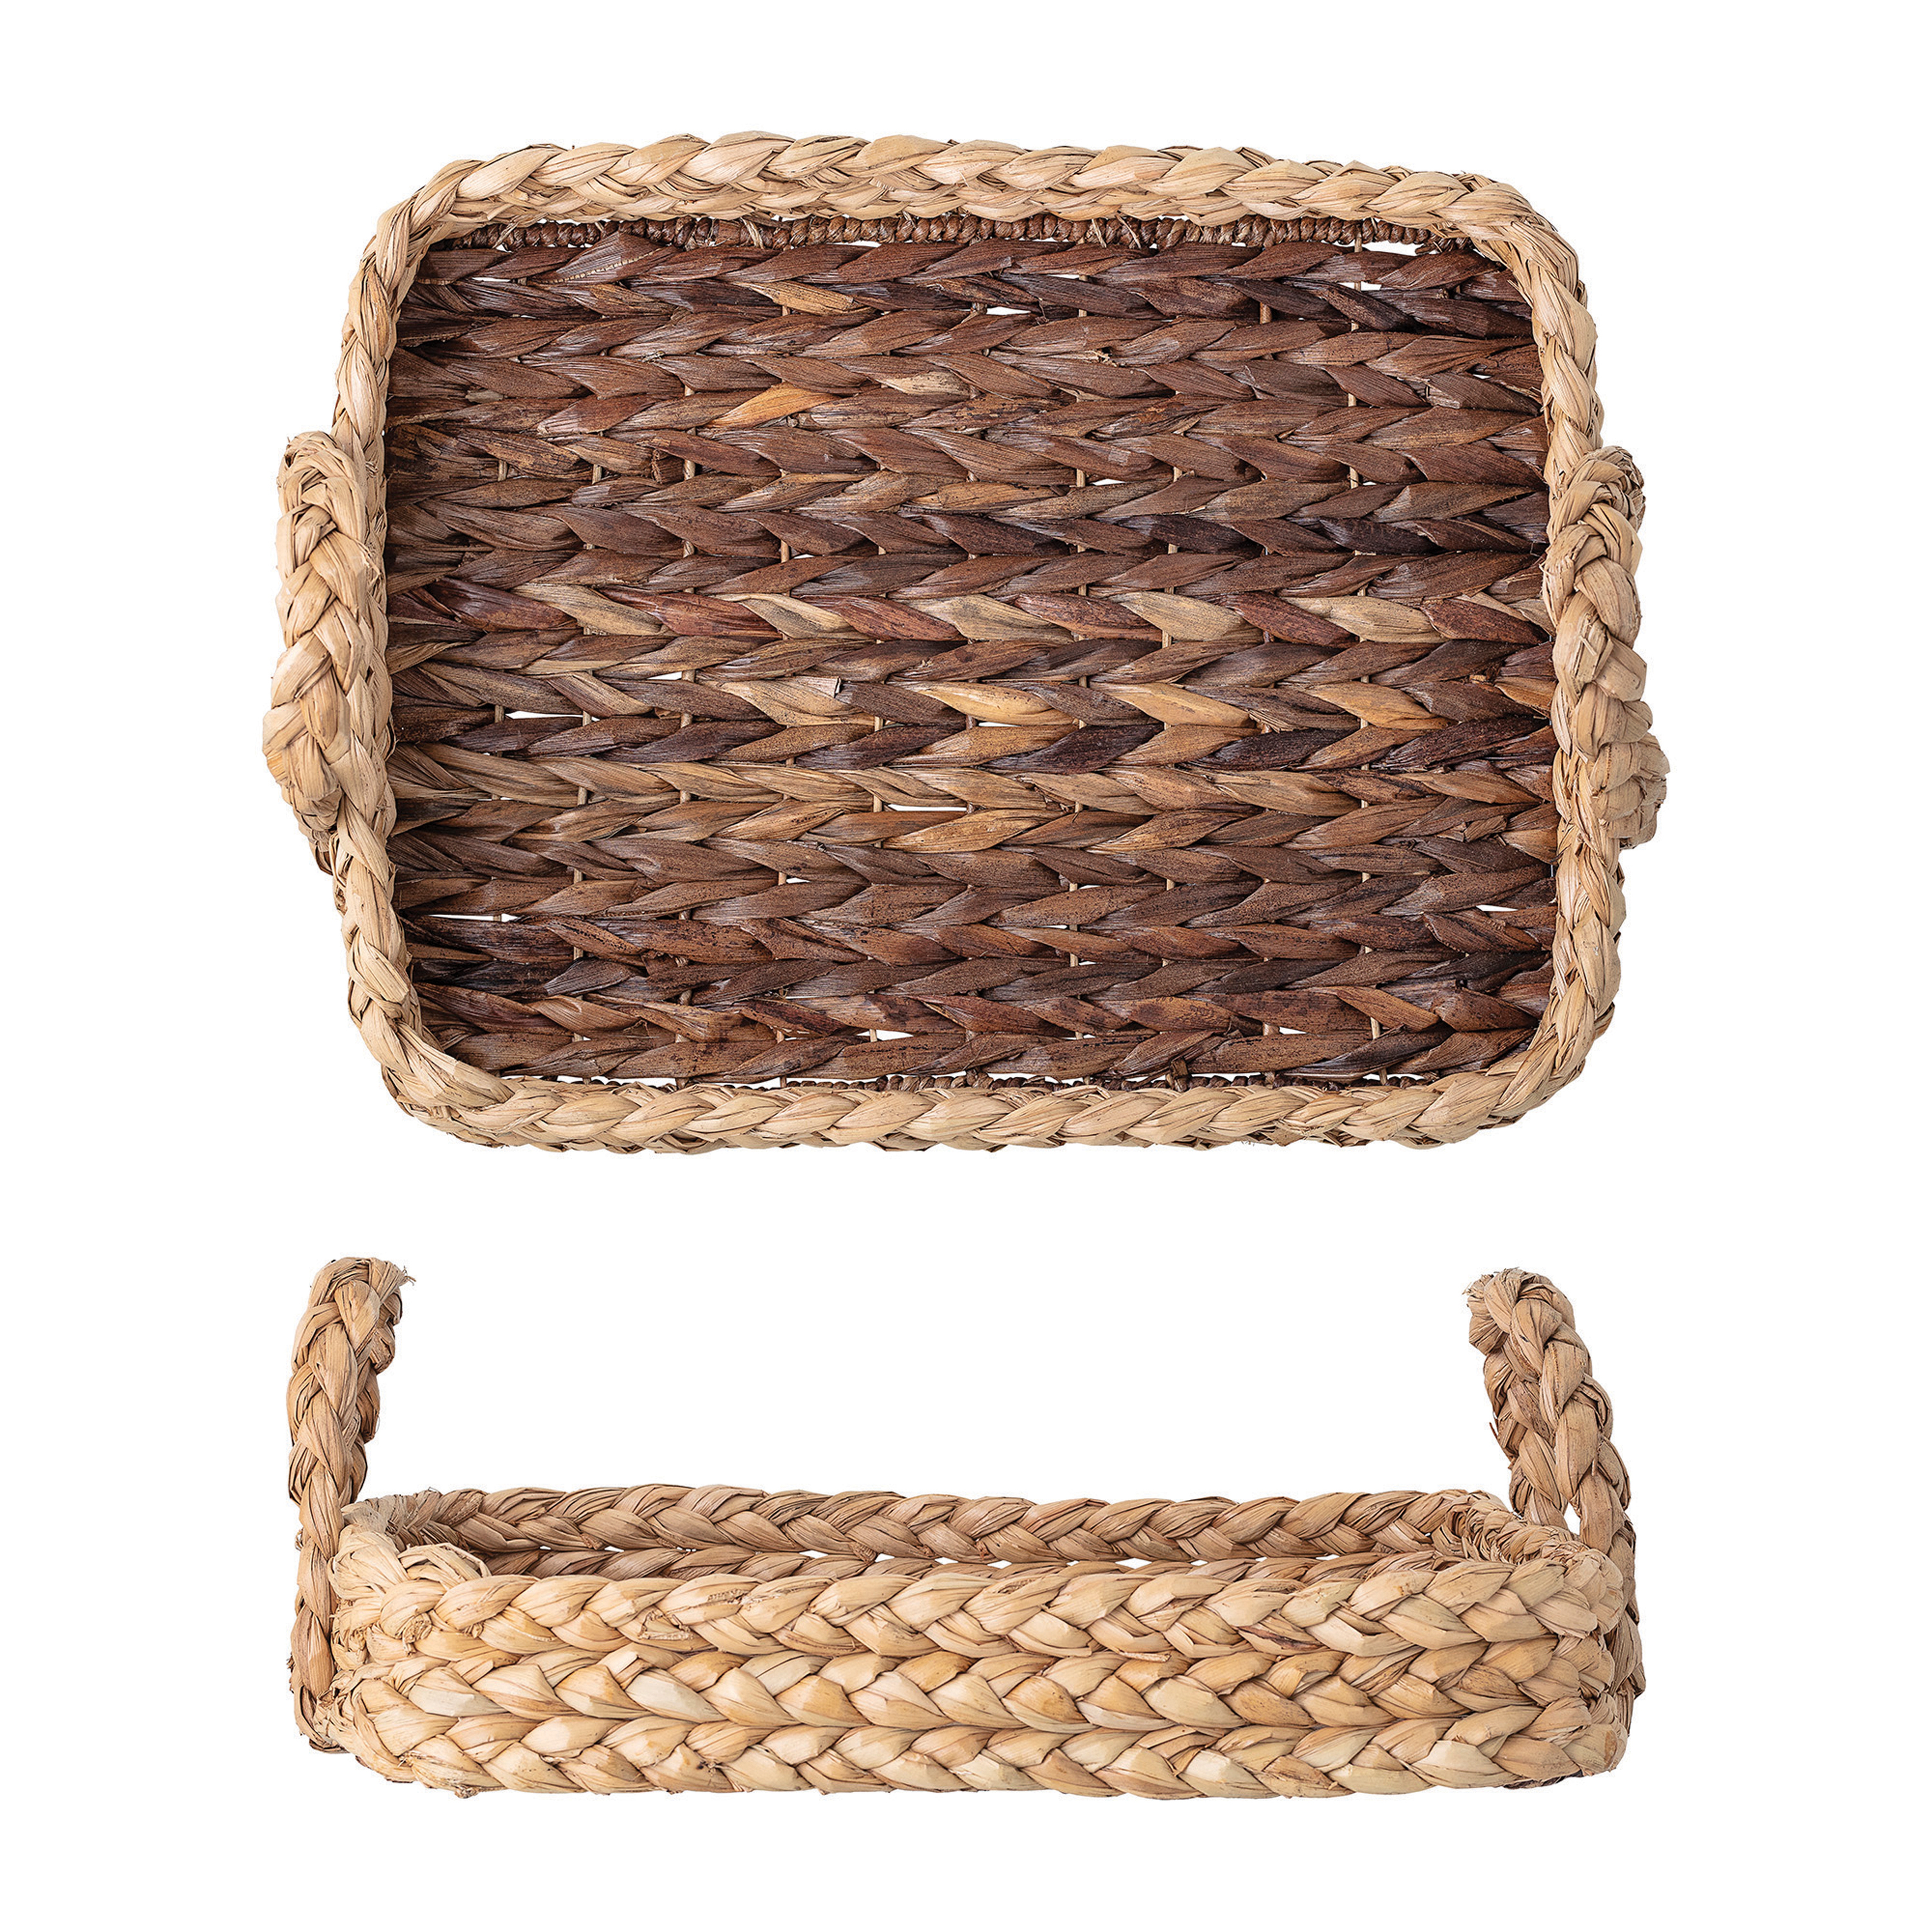 Decorative Handwoven Seagrass Tray with Handles - Moss & Wilder